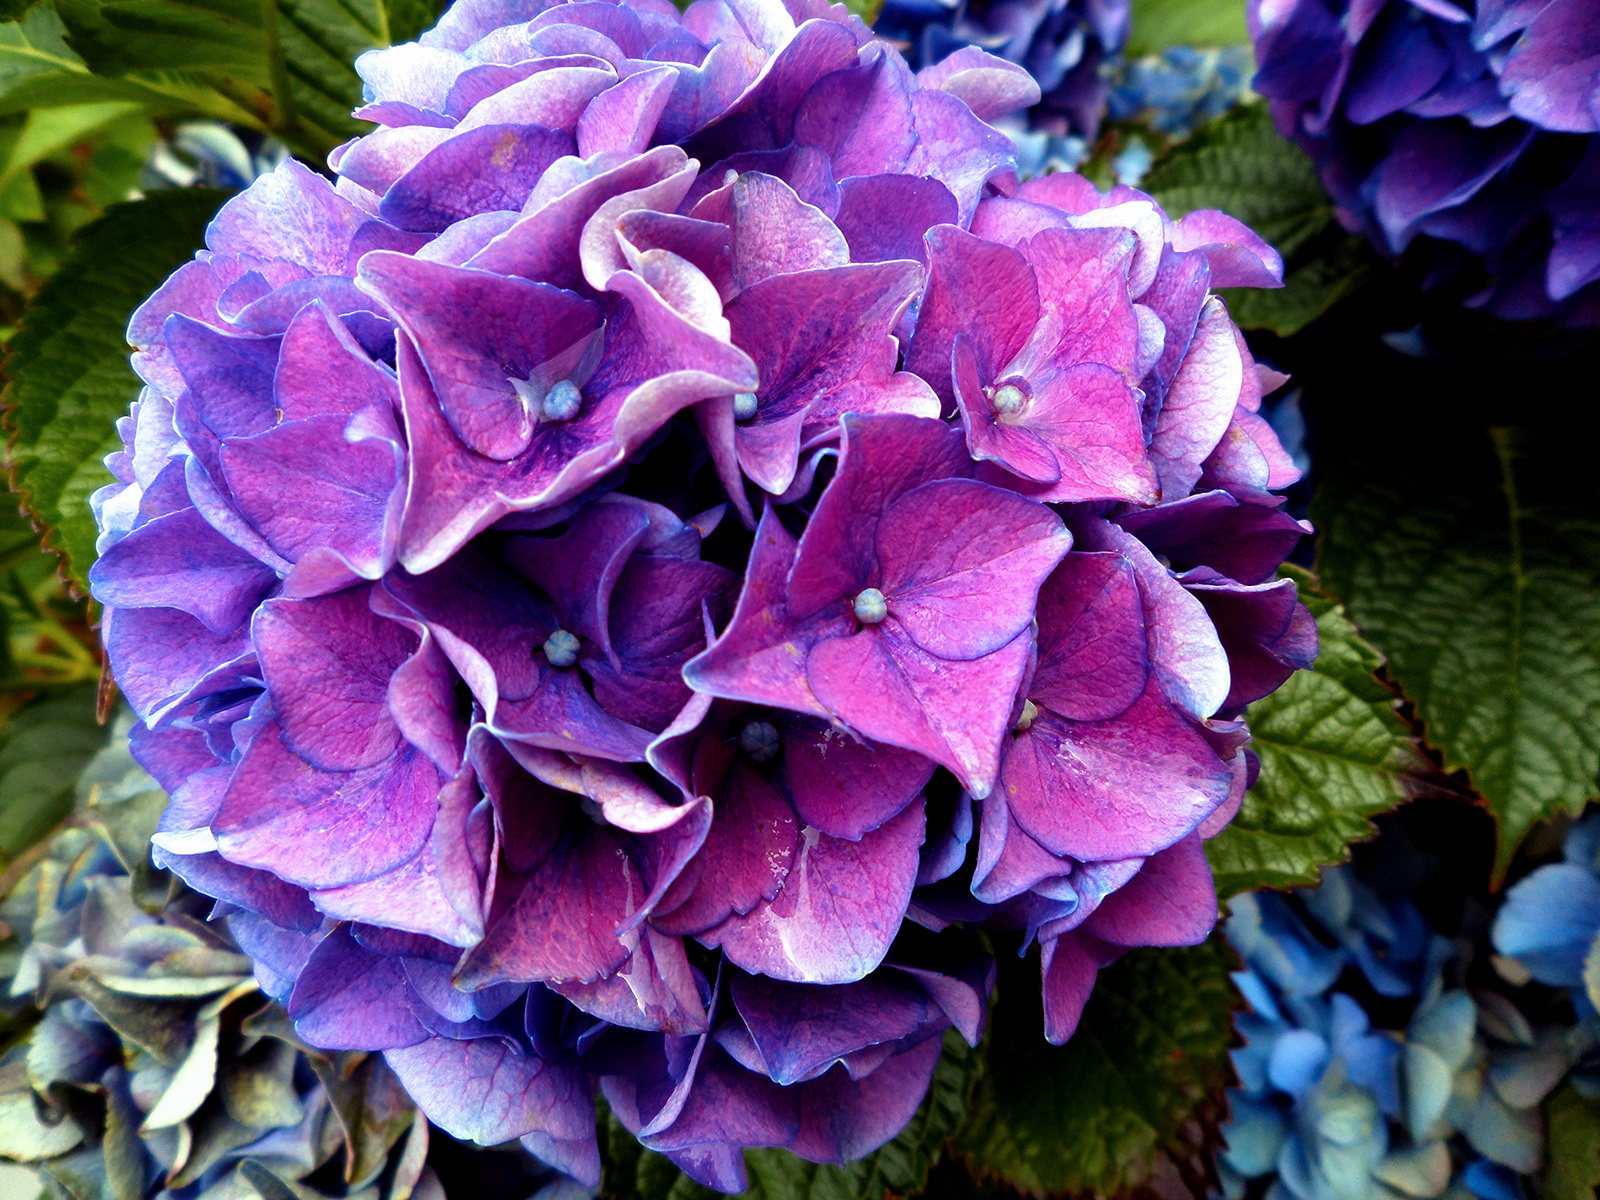 Hydrangeas are one of very few plants that accumulate aluminium -- in fact, it's what gave them their color.